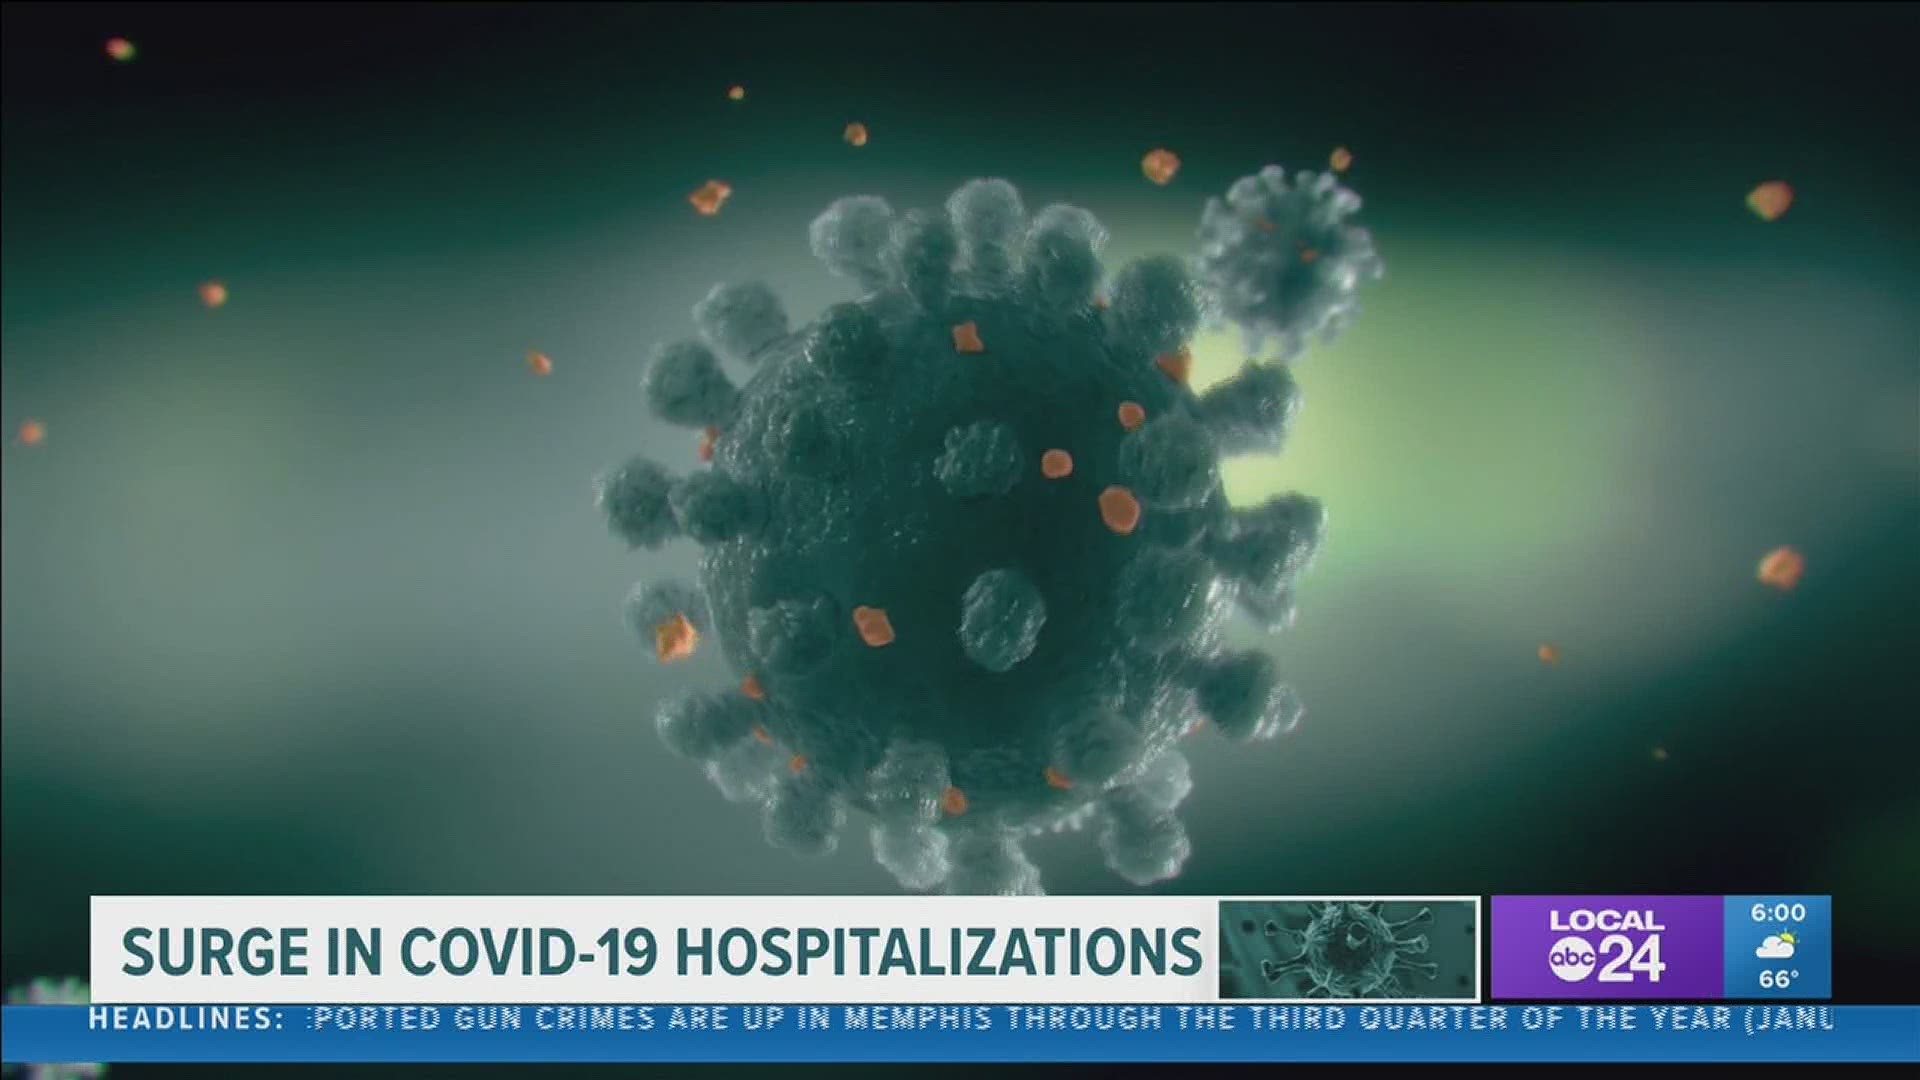 Methodist Le Bonheur Healthcare system also reports a new record high for COVID-19 patients was set Wednesday.